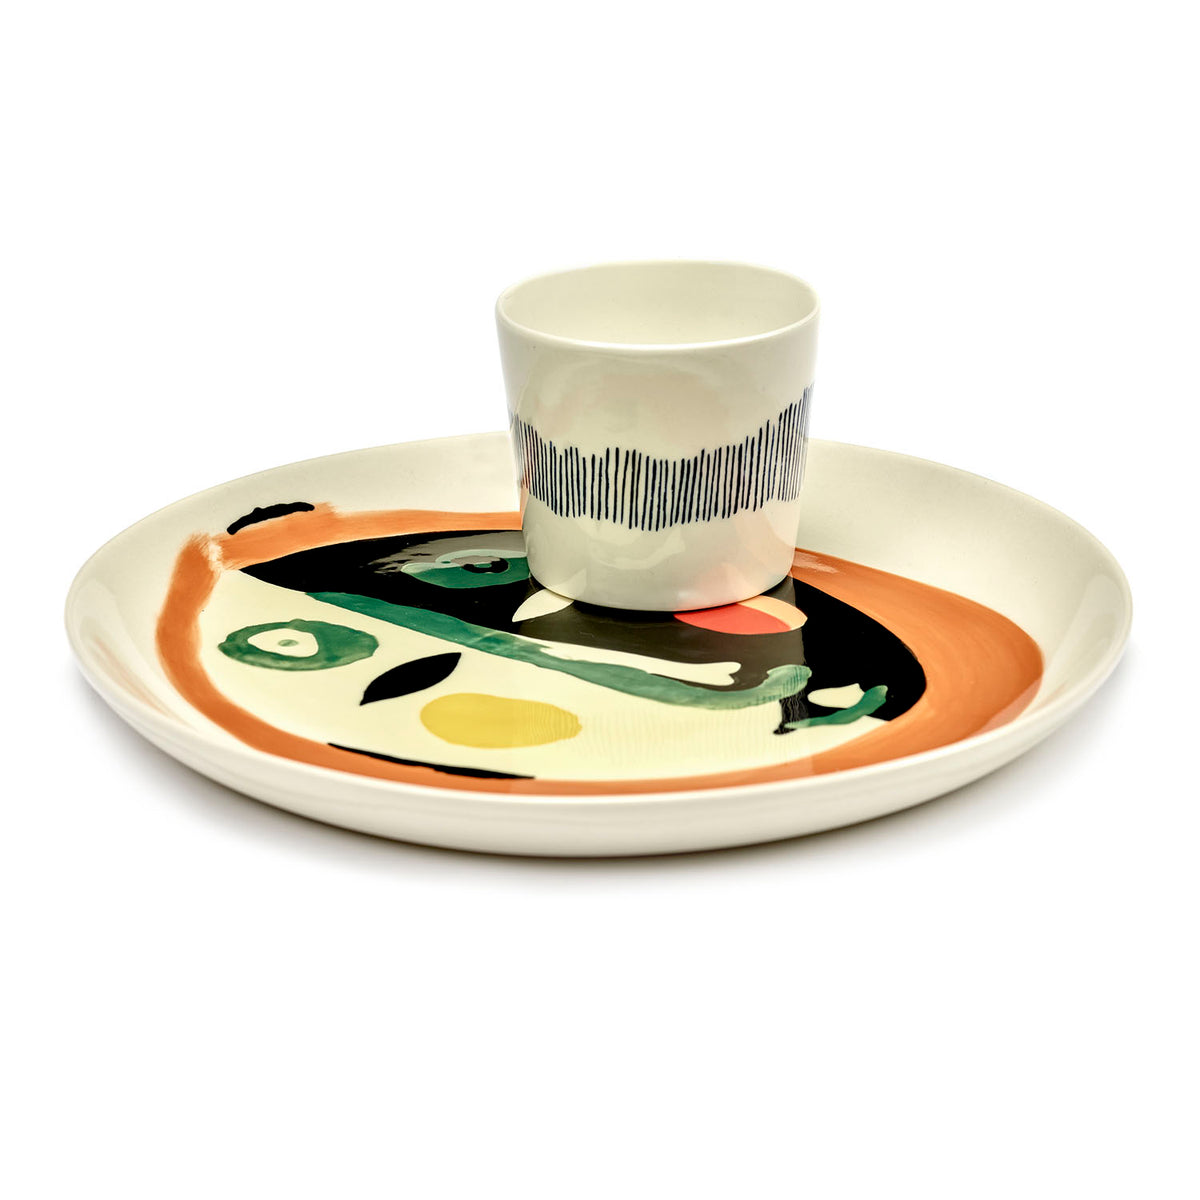 Ottolenghi for Serax Feast collection, side view of medium plate with face design and small cup, plates available in four sizes and mixed designs.